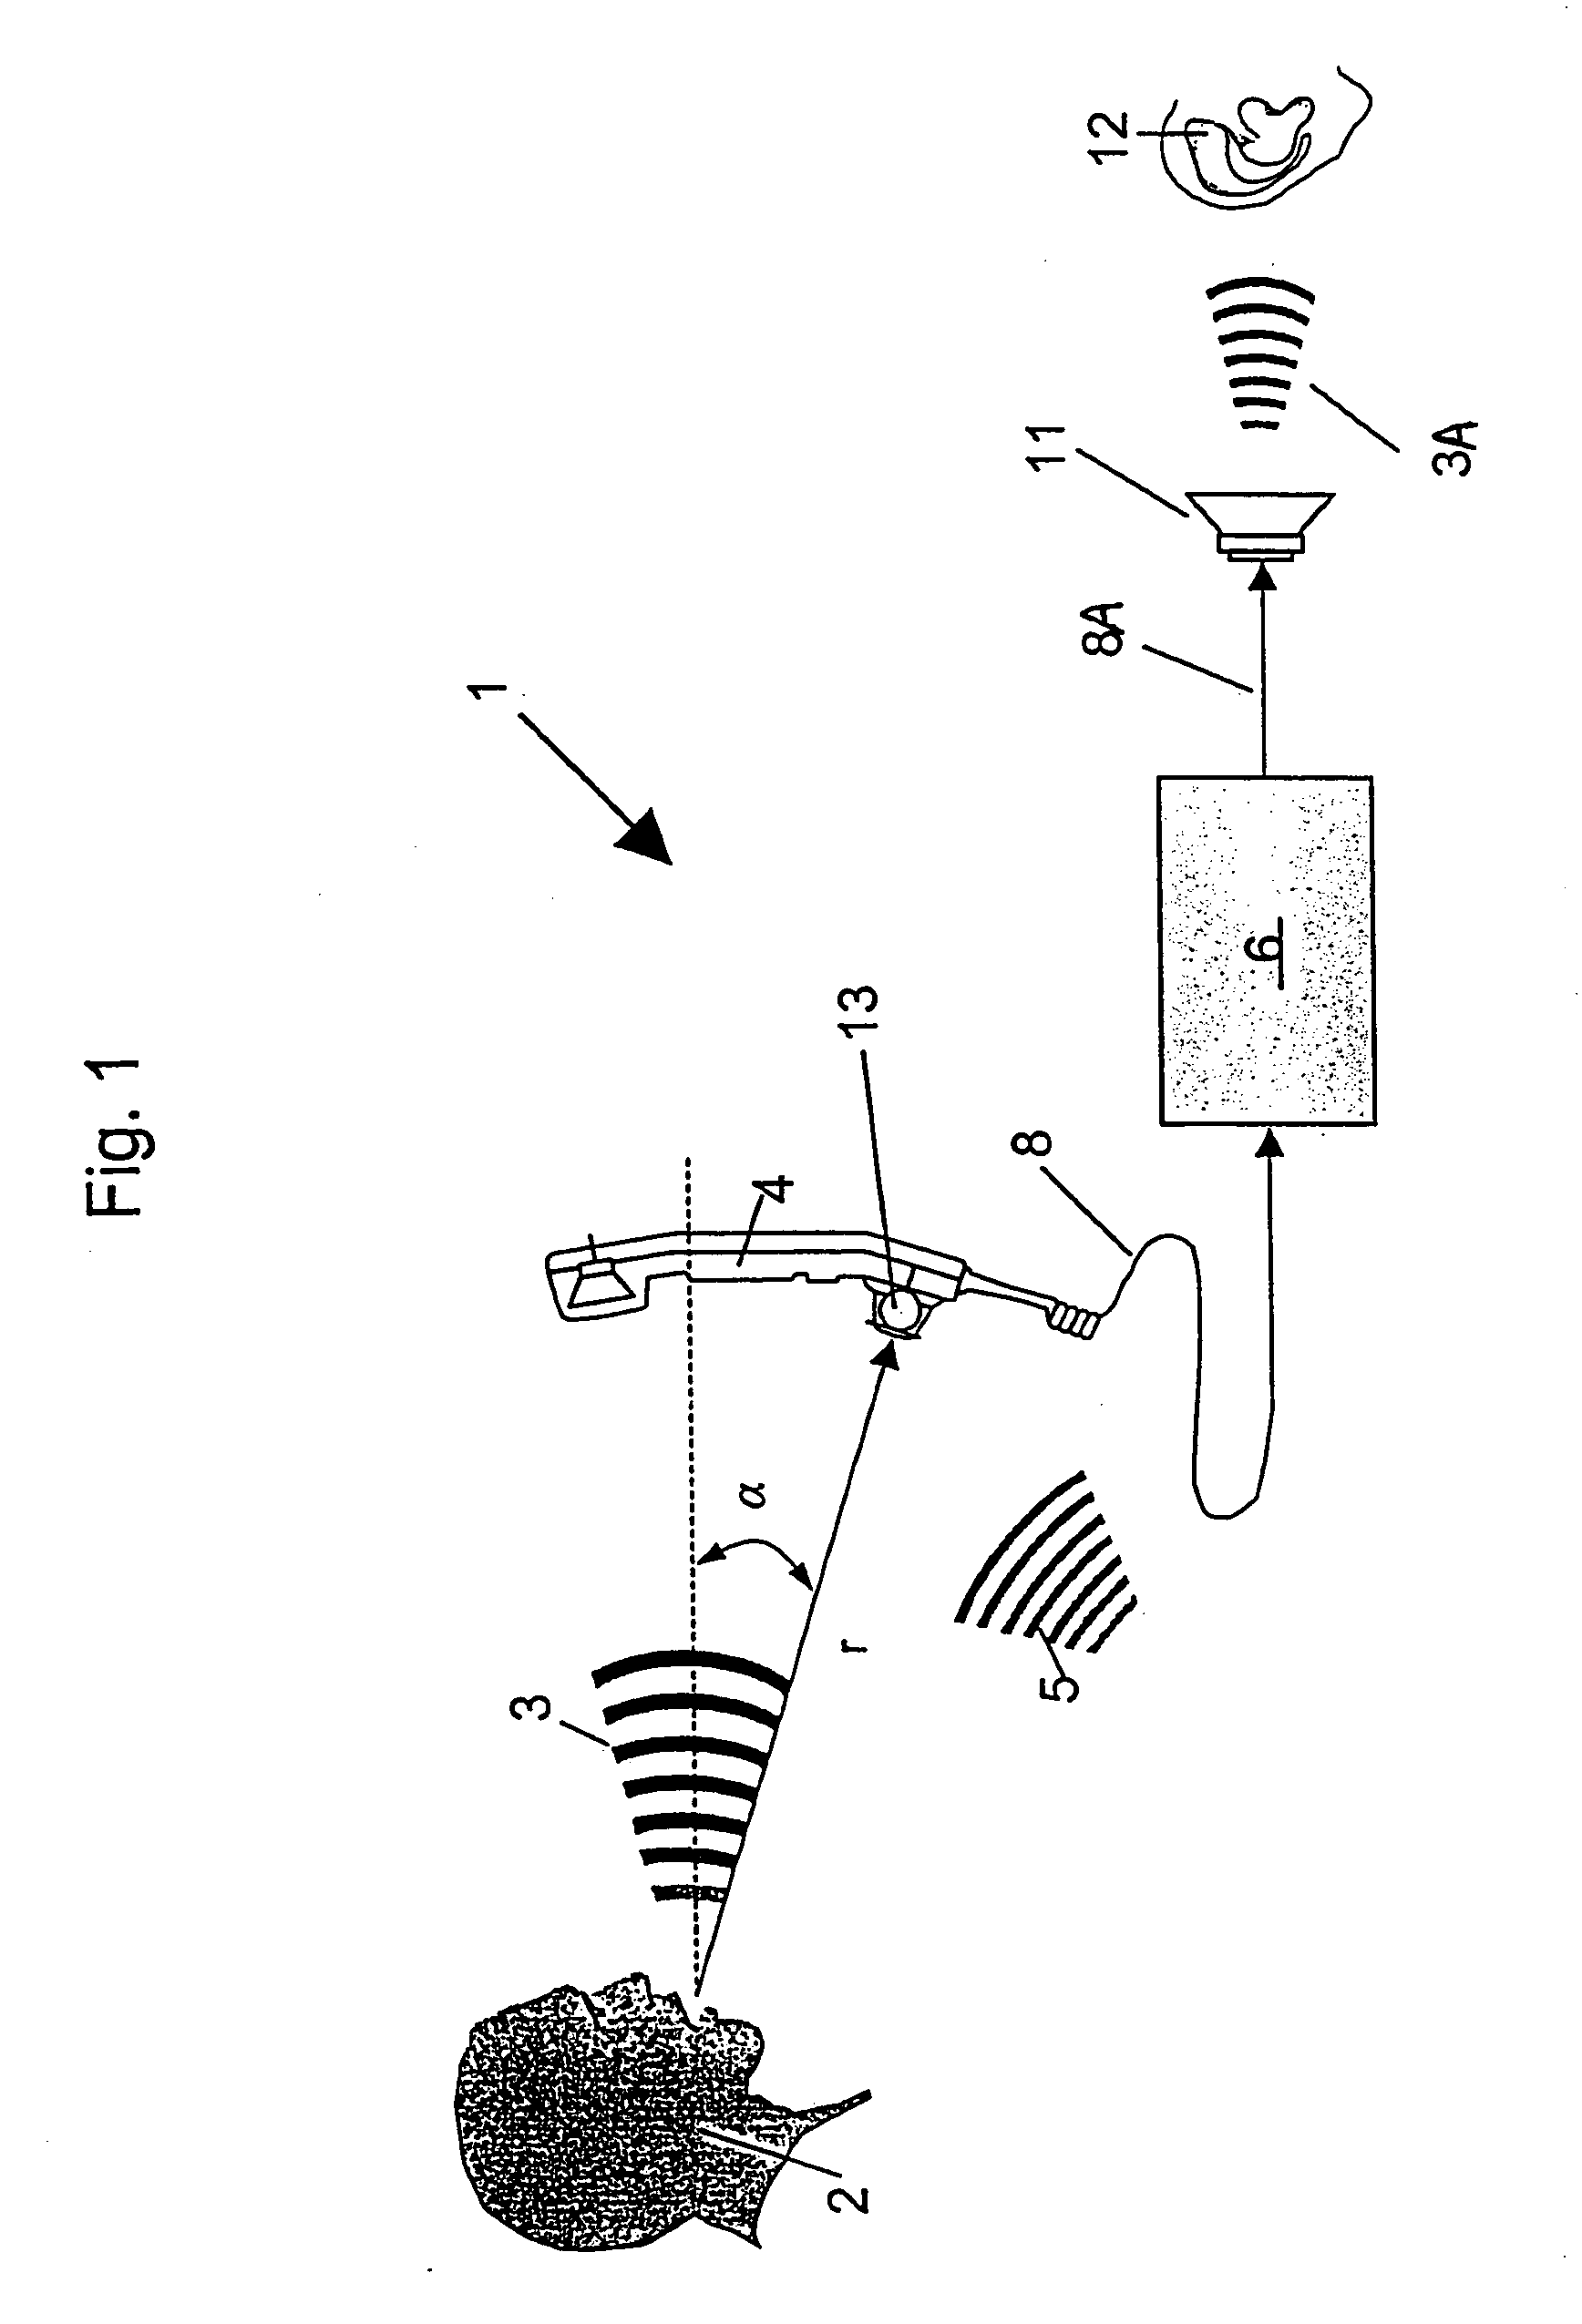 Method and apparatus for improving the quality of speech signals transmitted in an aircraft communication system